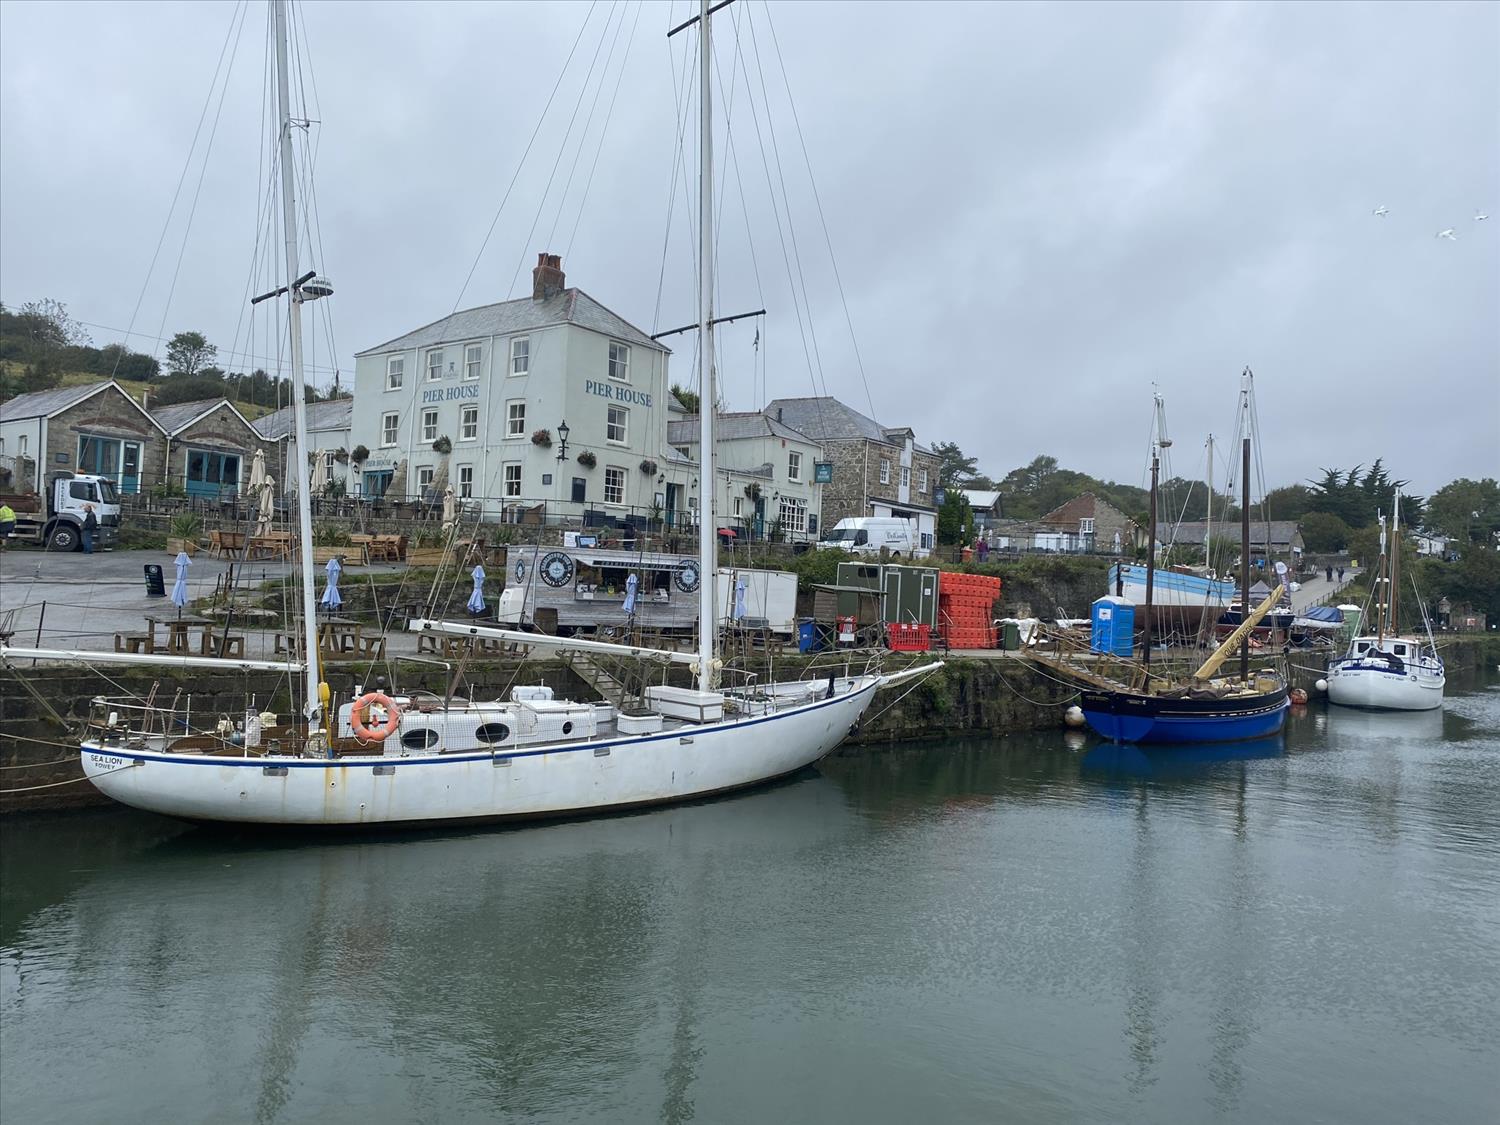 Charlestown in the rain. A great day trip from Polrunny Farm Holiday Cottages